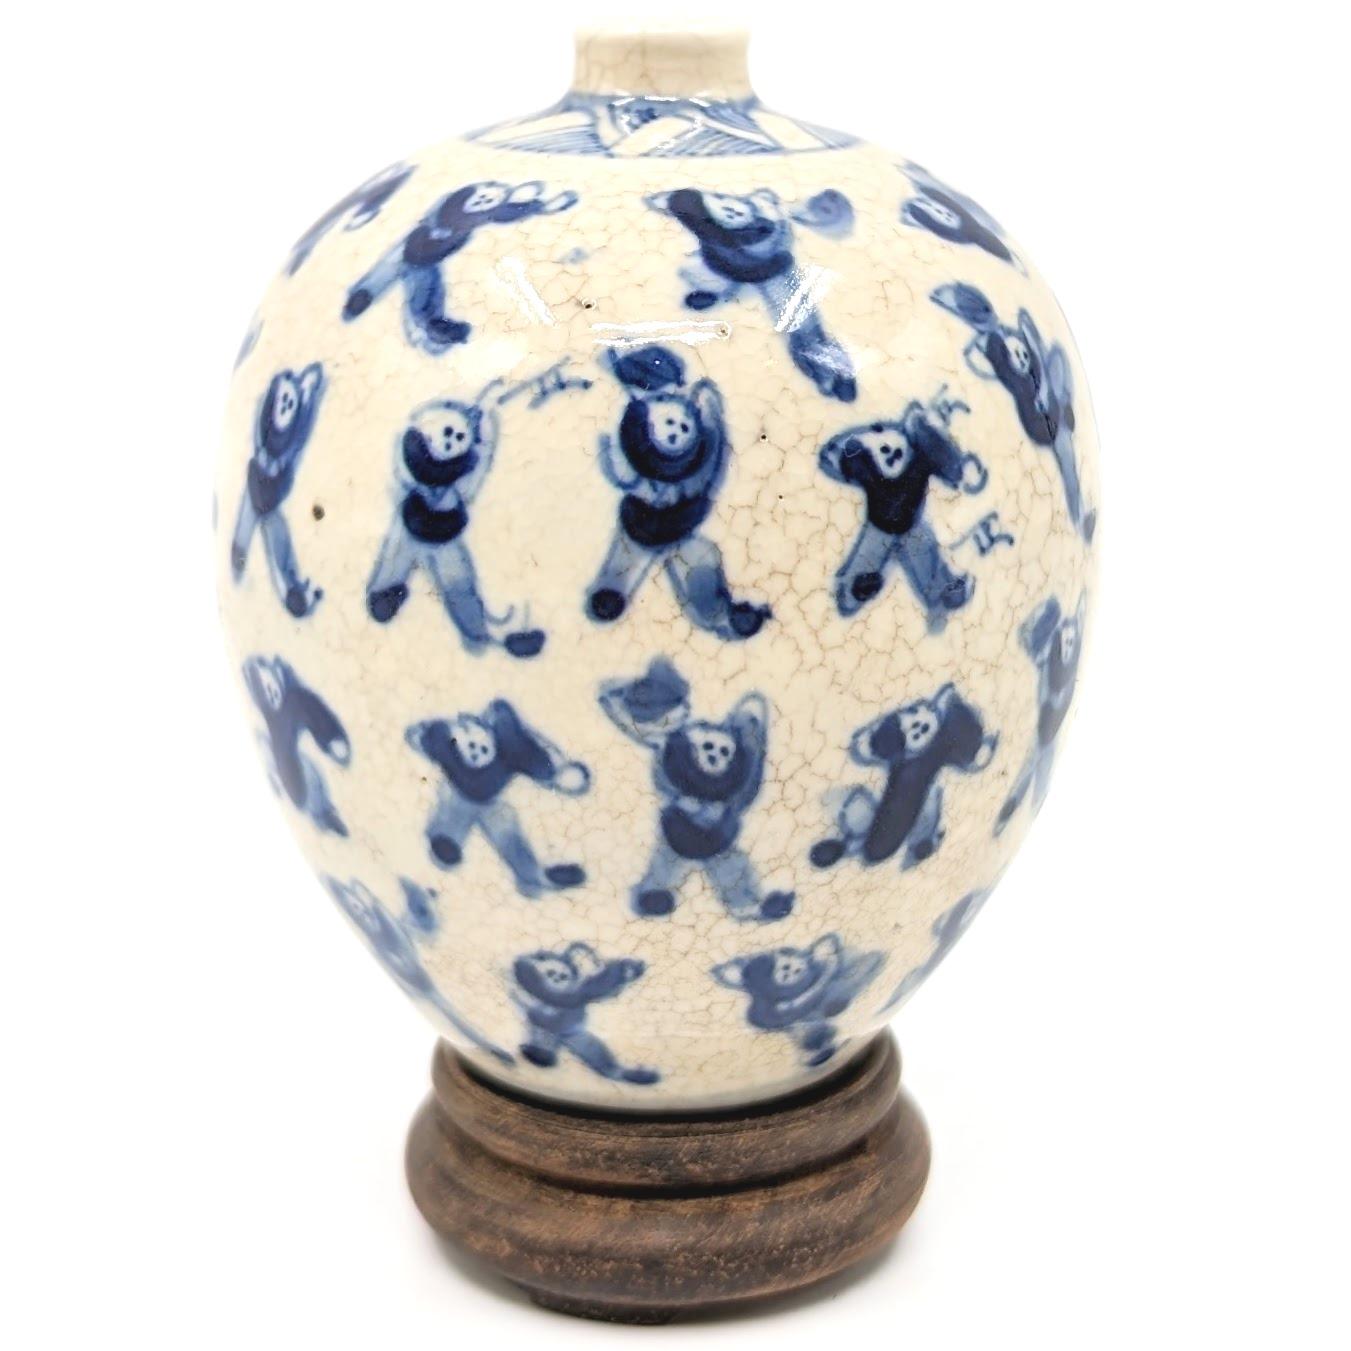 Antique Chinese porcelain snuff bottle in ovoid form, painted in underglaze blue and white in 